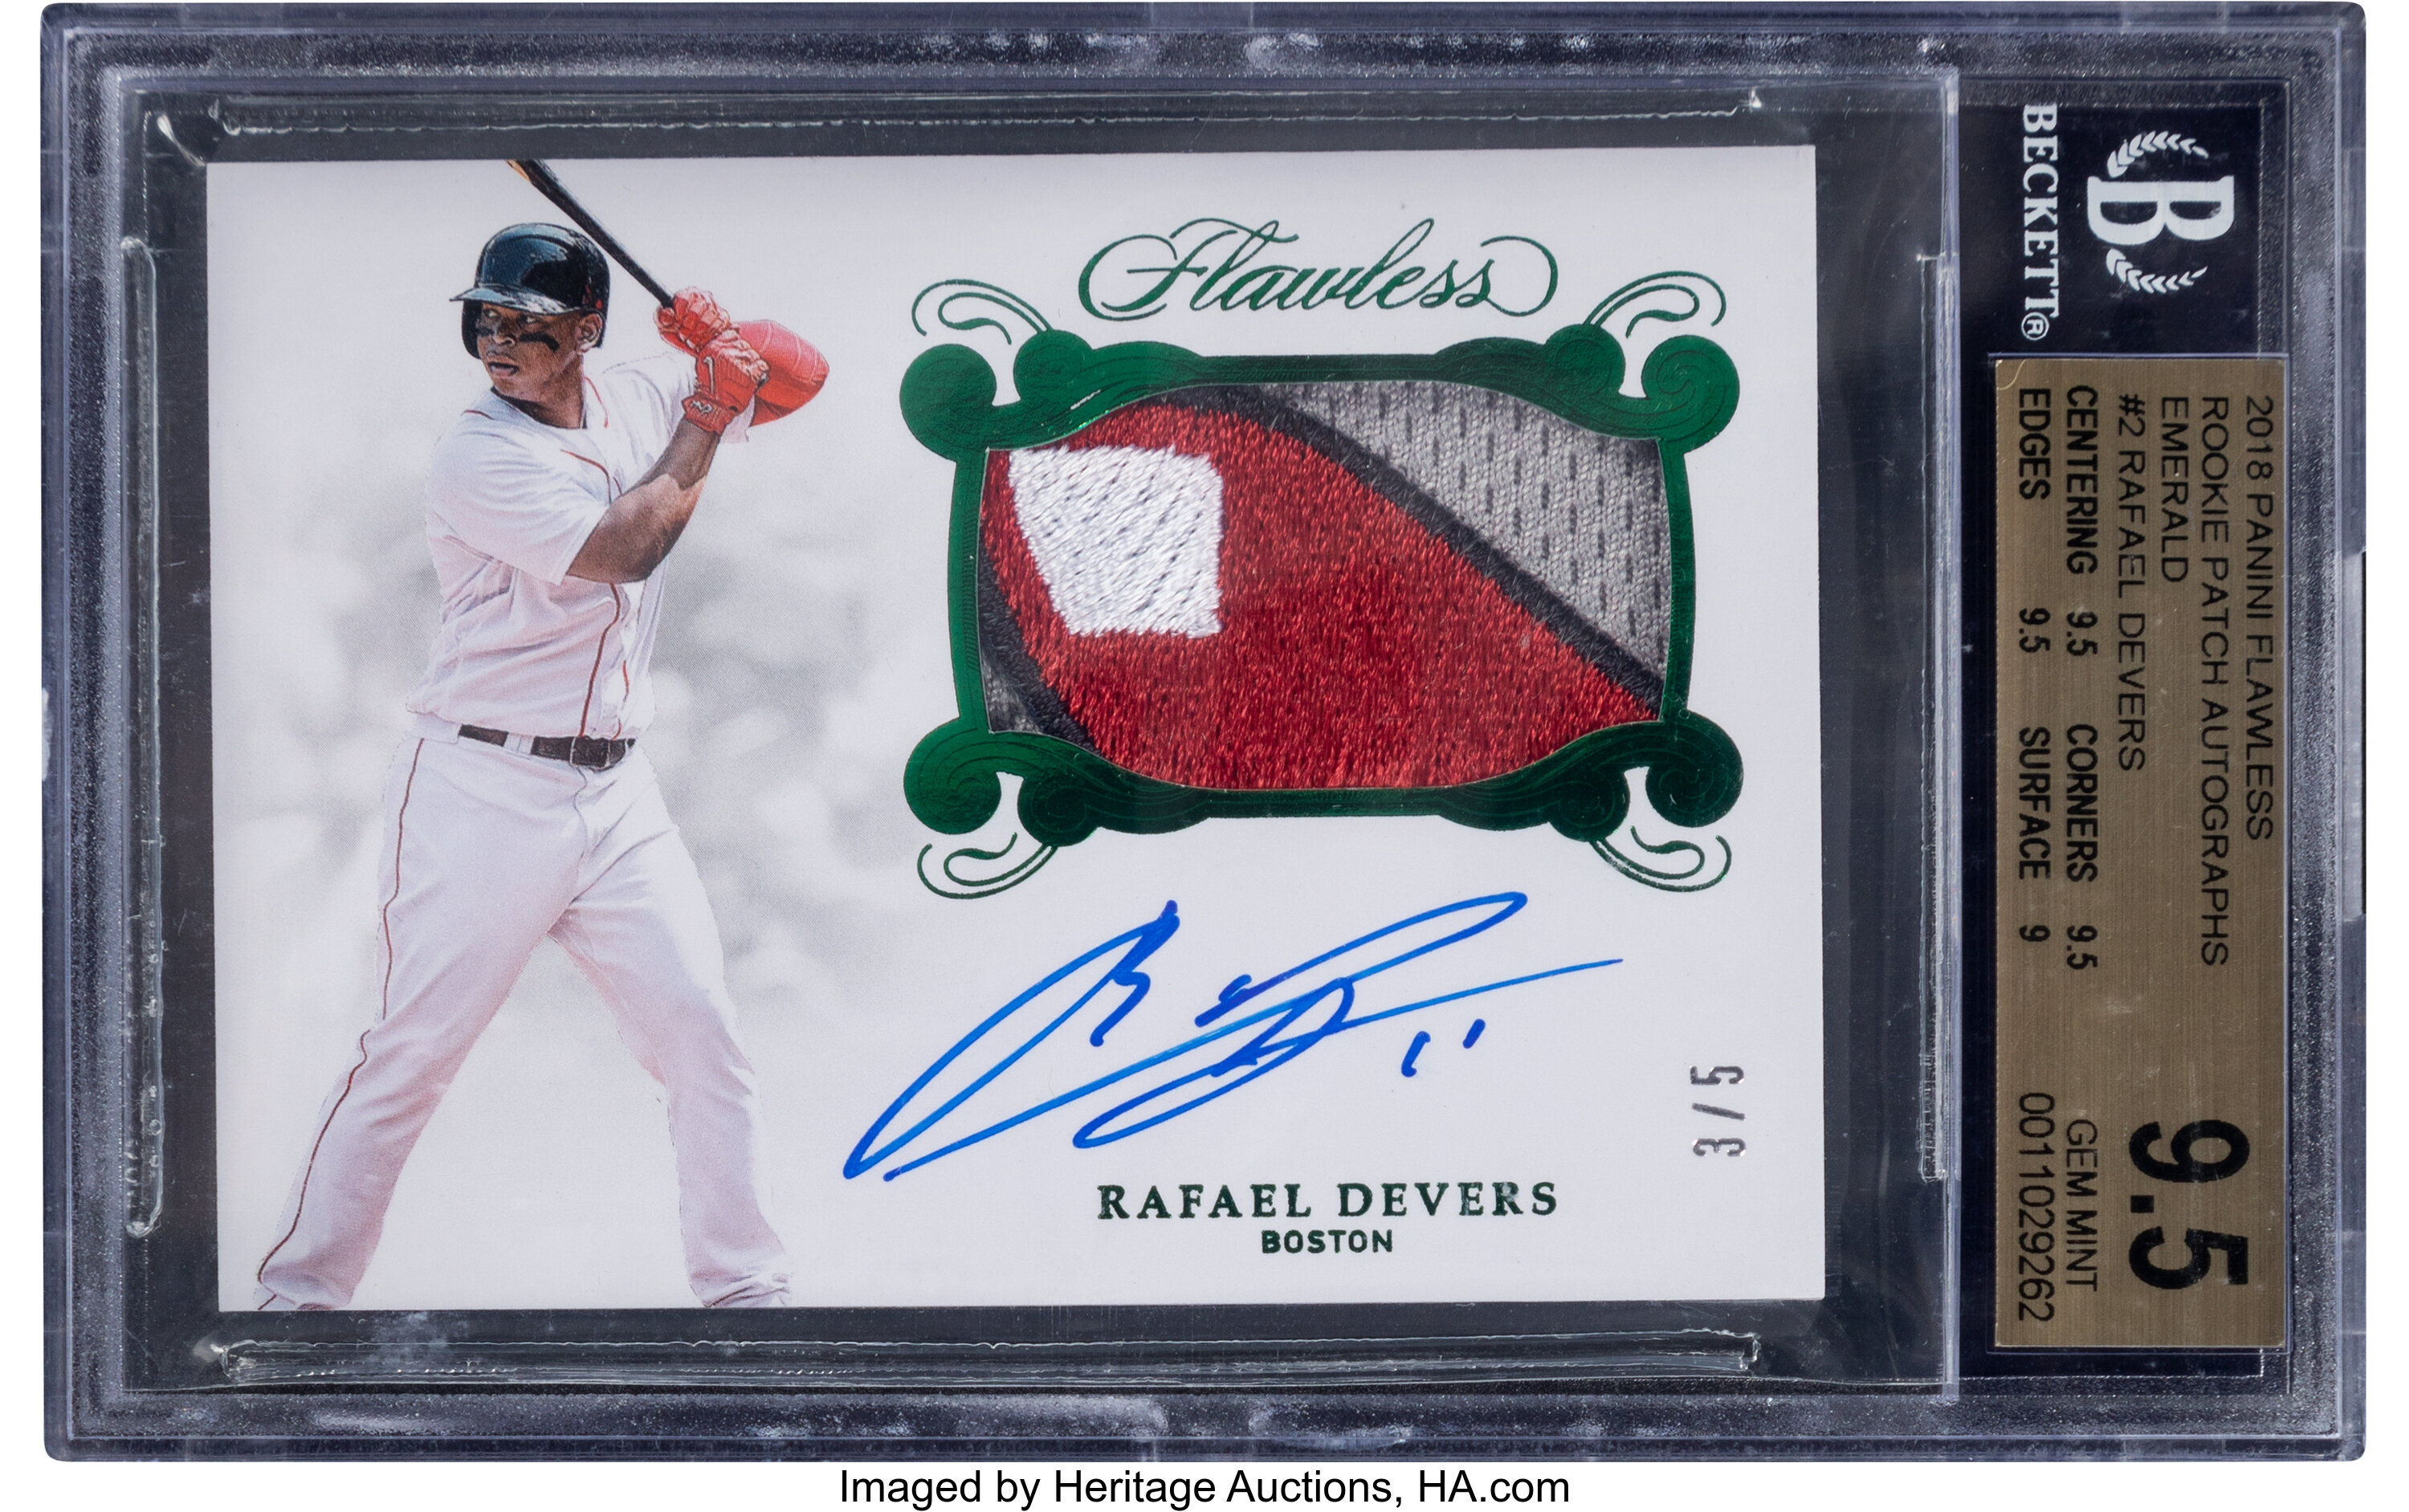 2018 Panini Flawless Rafael Devers Rookie Patch Autograph Emerald Lot 54362 Heritage Auctions